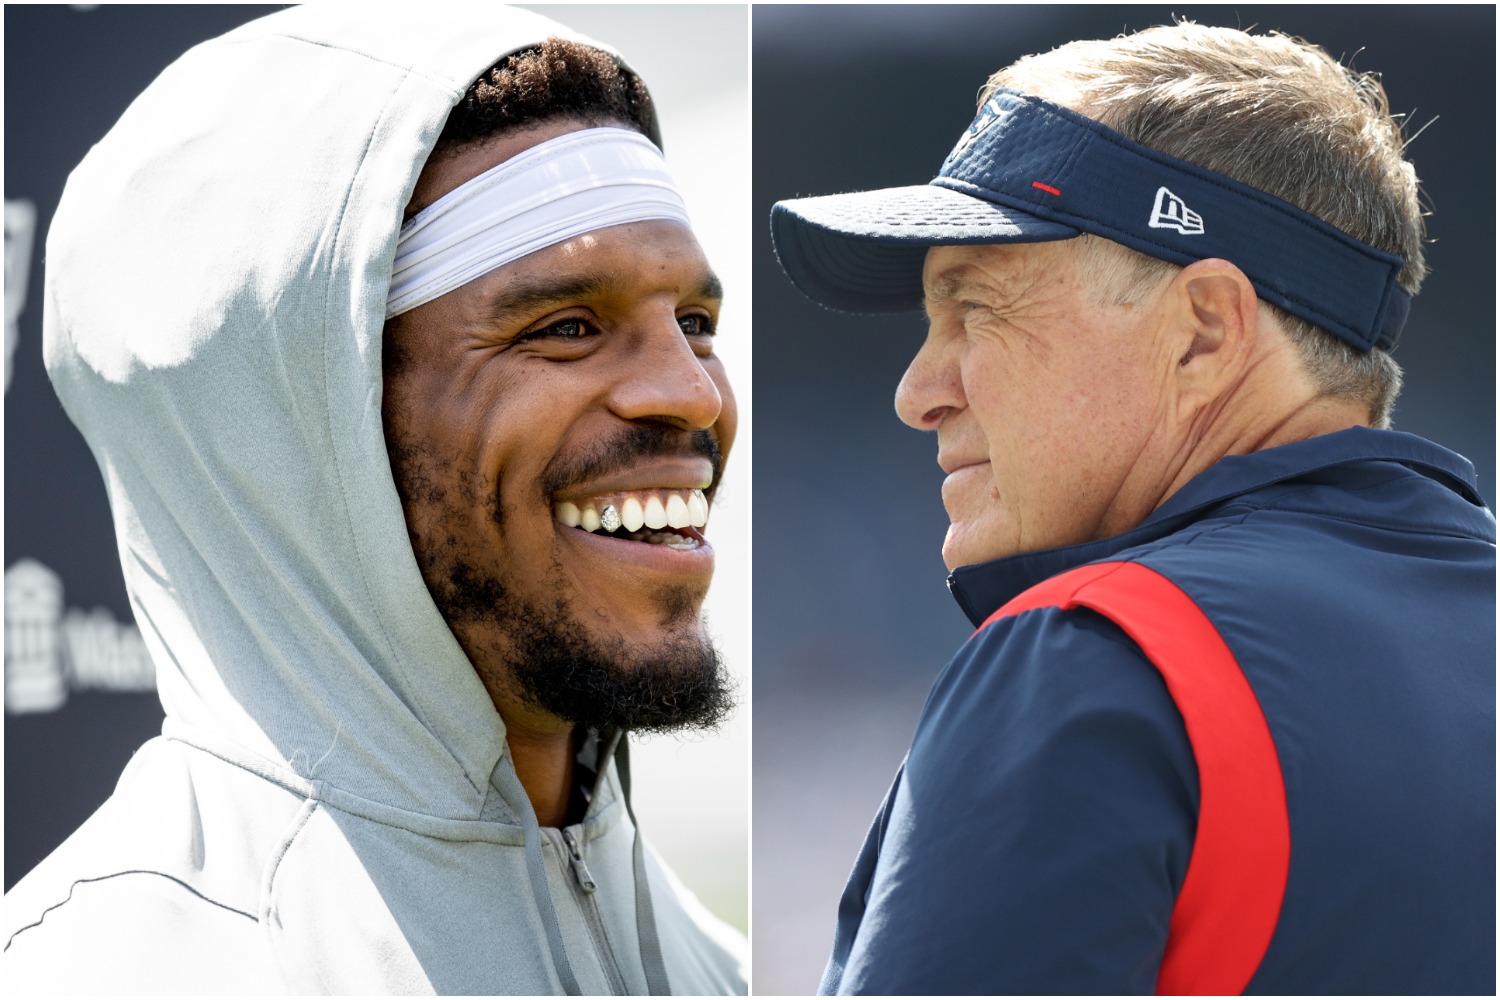 Cam Newton smiles while talking with reporters as New England Patriots head coach Bill Belichick looks on during a game.